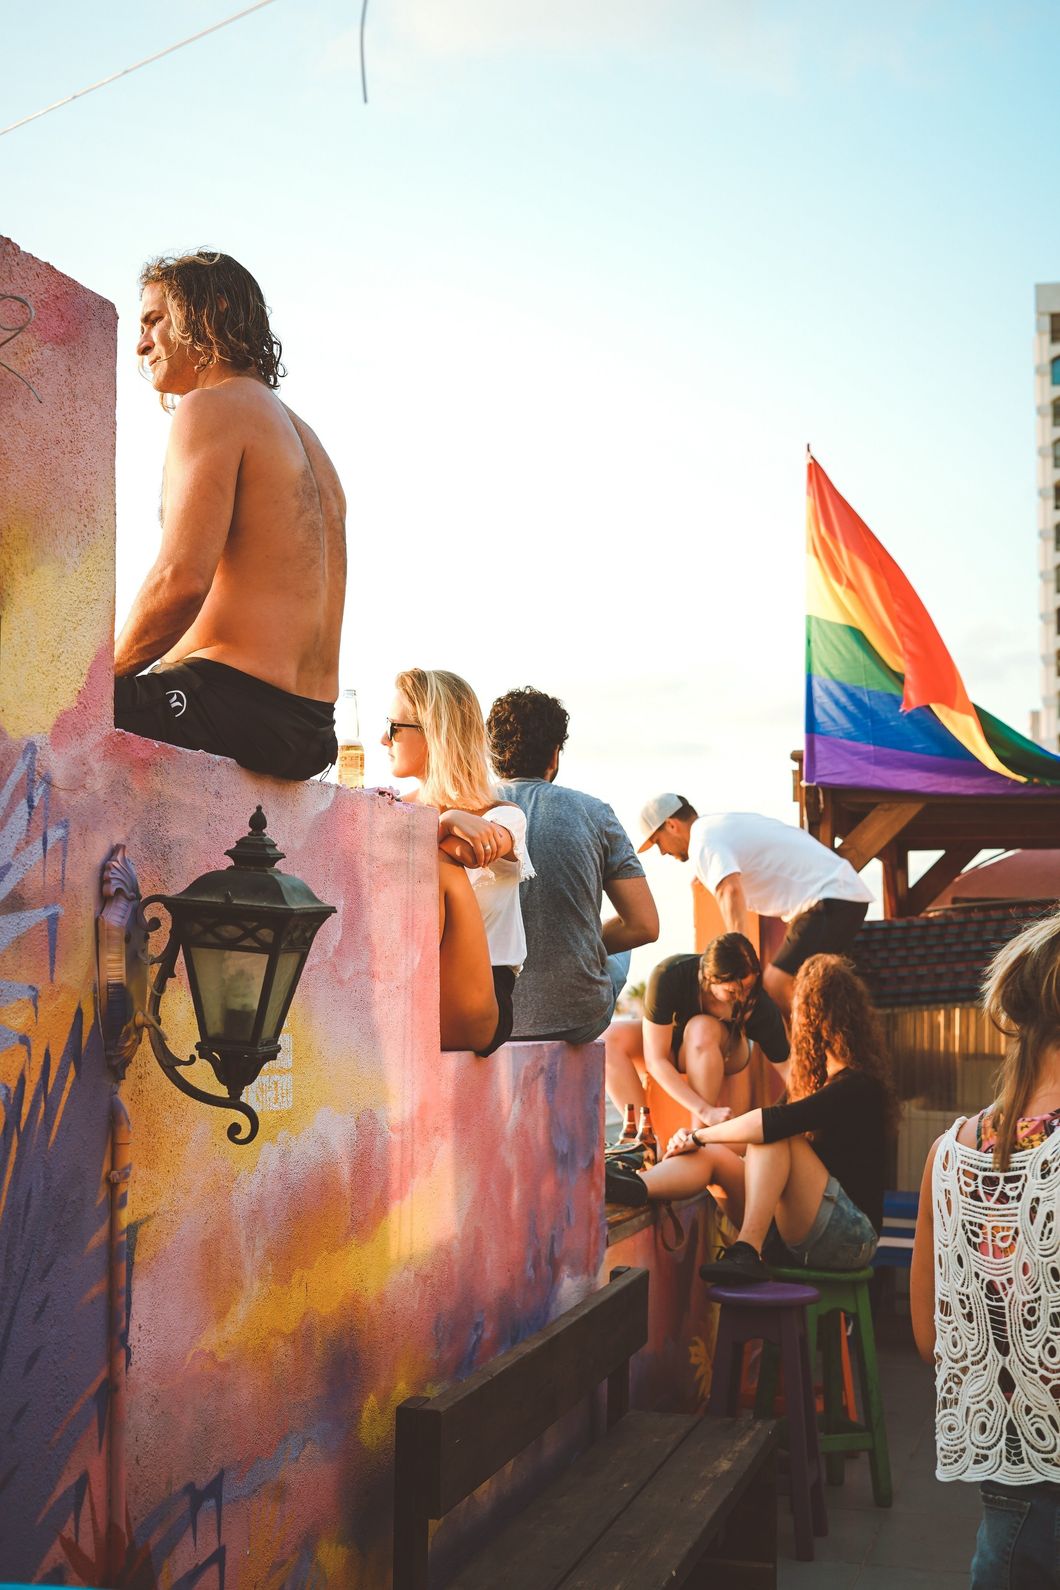 10 Sexualities You Need To Understand If You're Going To Insist On Labeling People